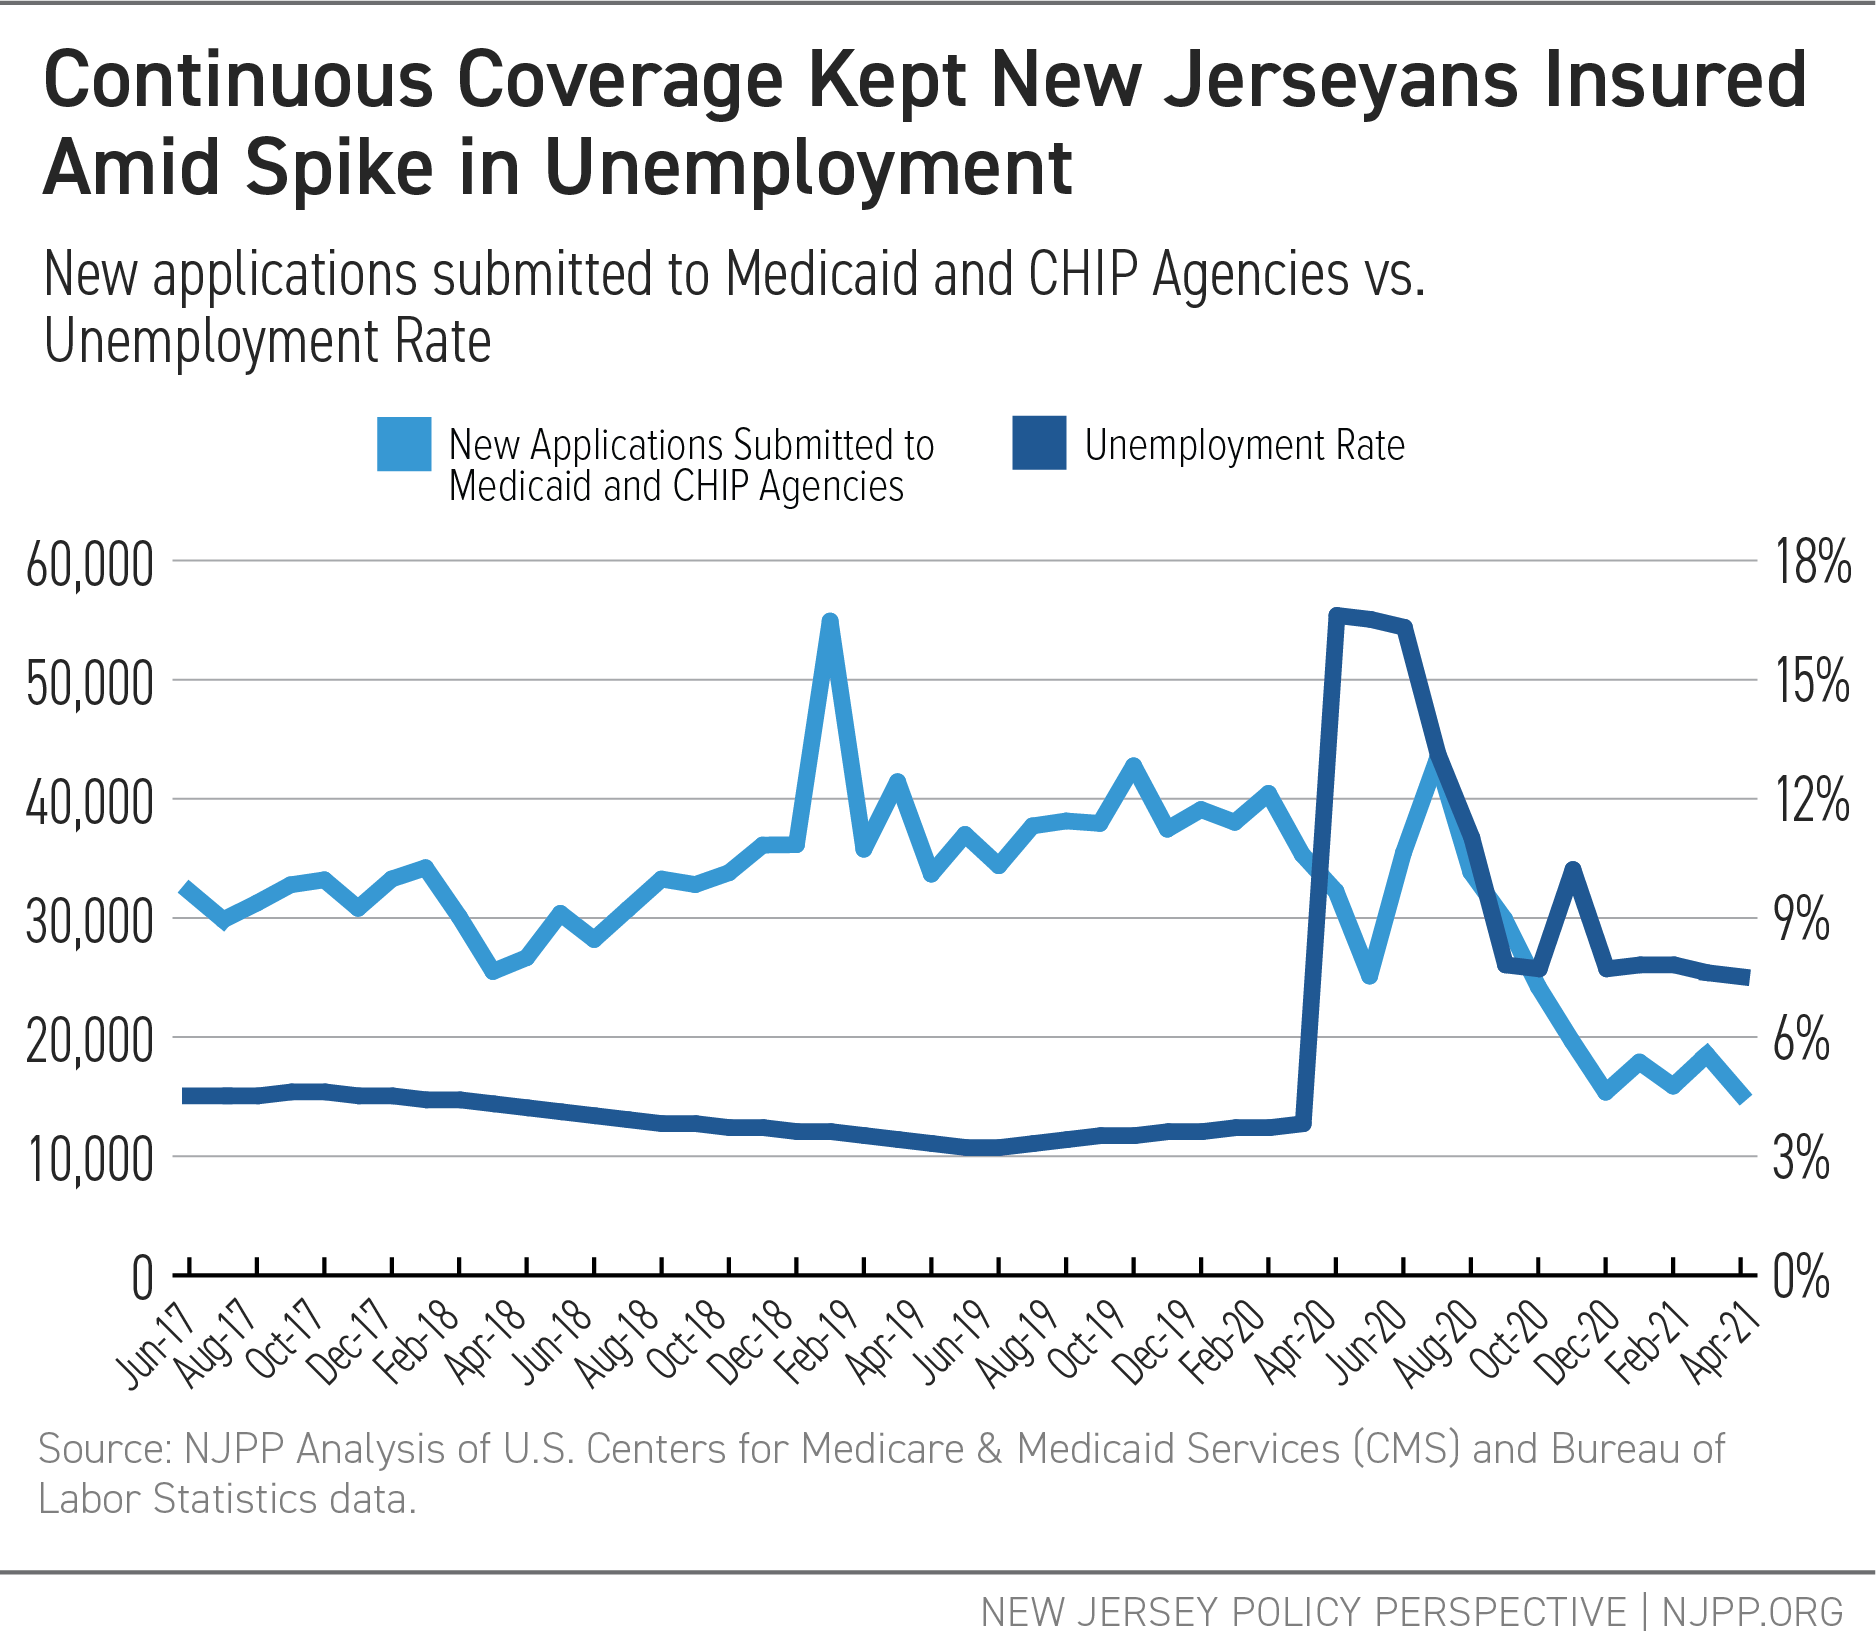 Maintaining Continuous Medicaid Coverage After the Pandemic Would